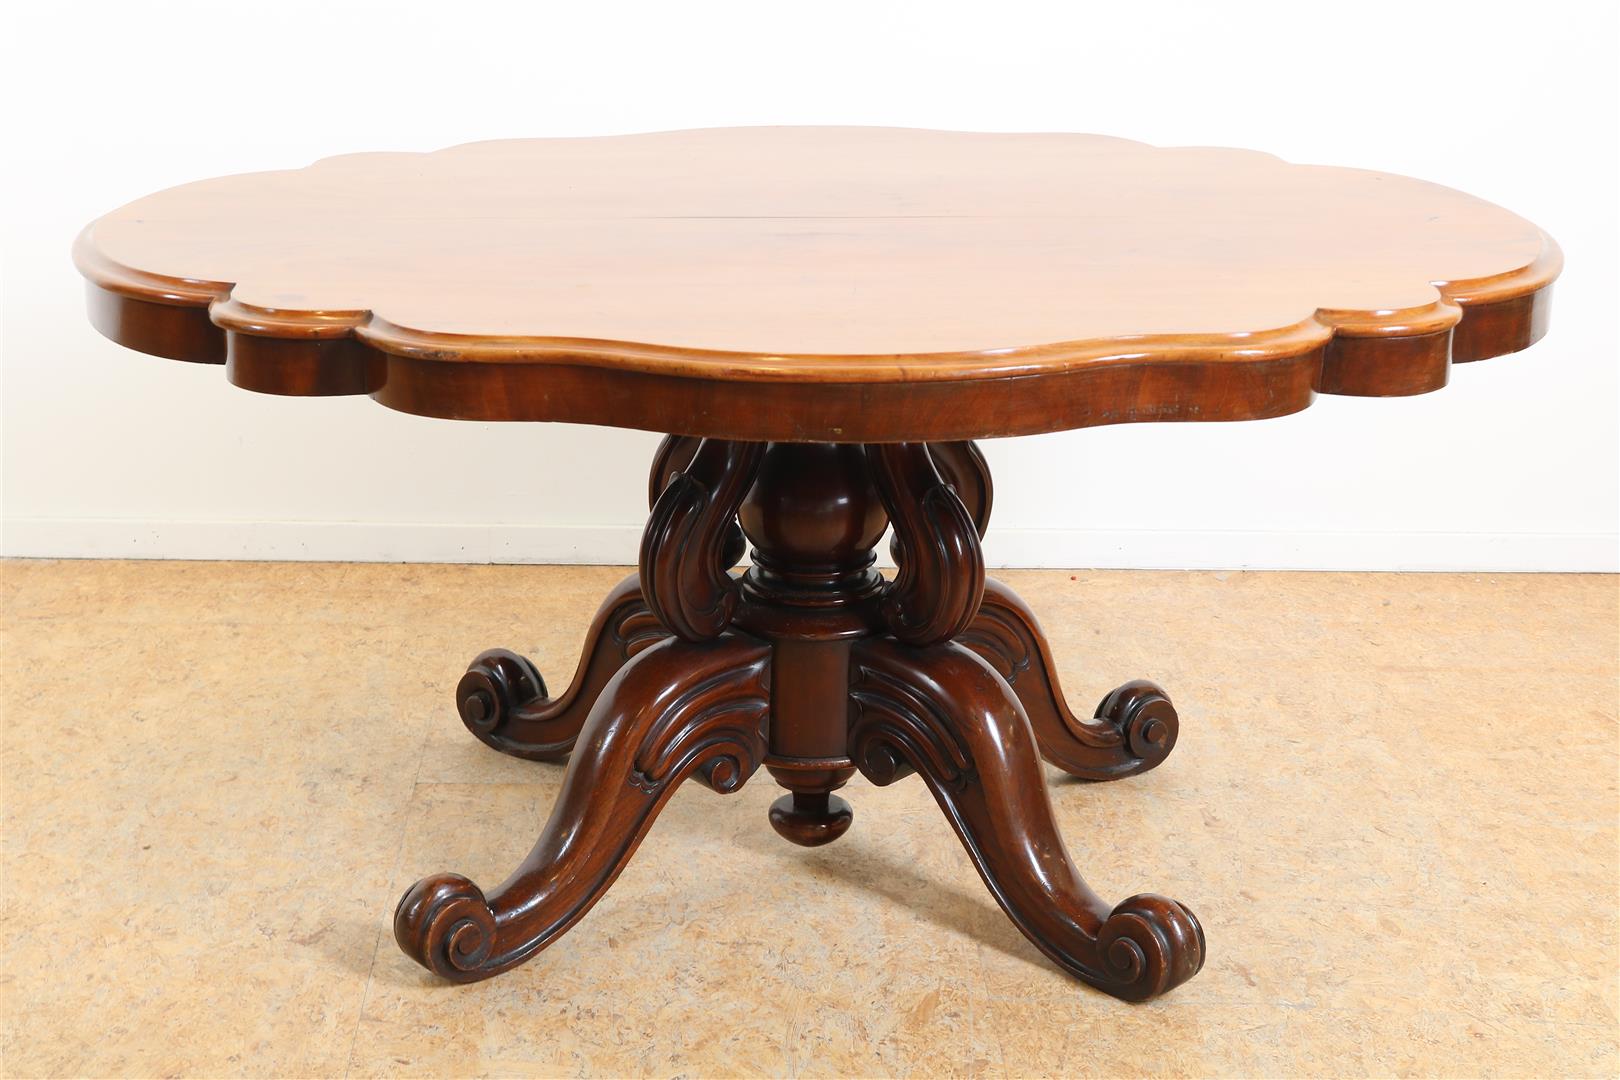 Mahogany Victorian coffee table with contoured top resting on richly carved legs ending in 4-sprant,